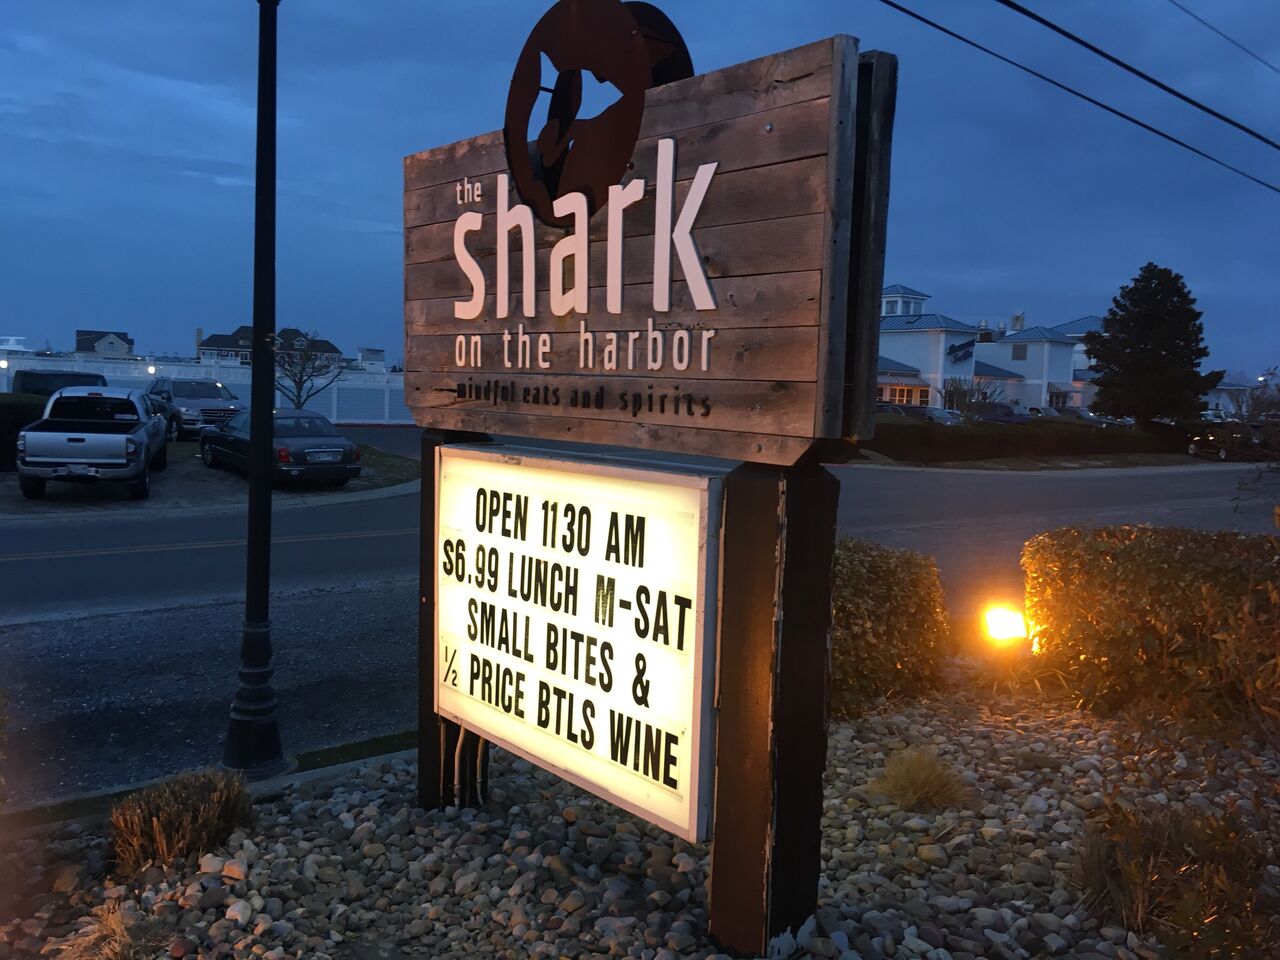 A photo of The Shark on the Harbor